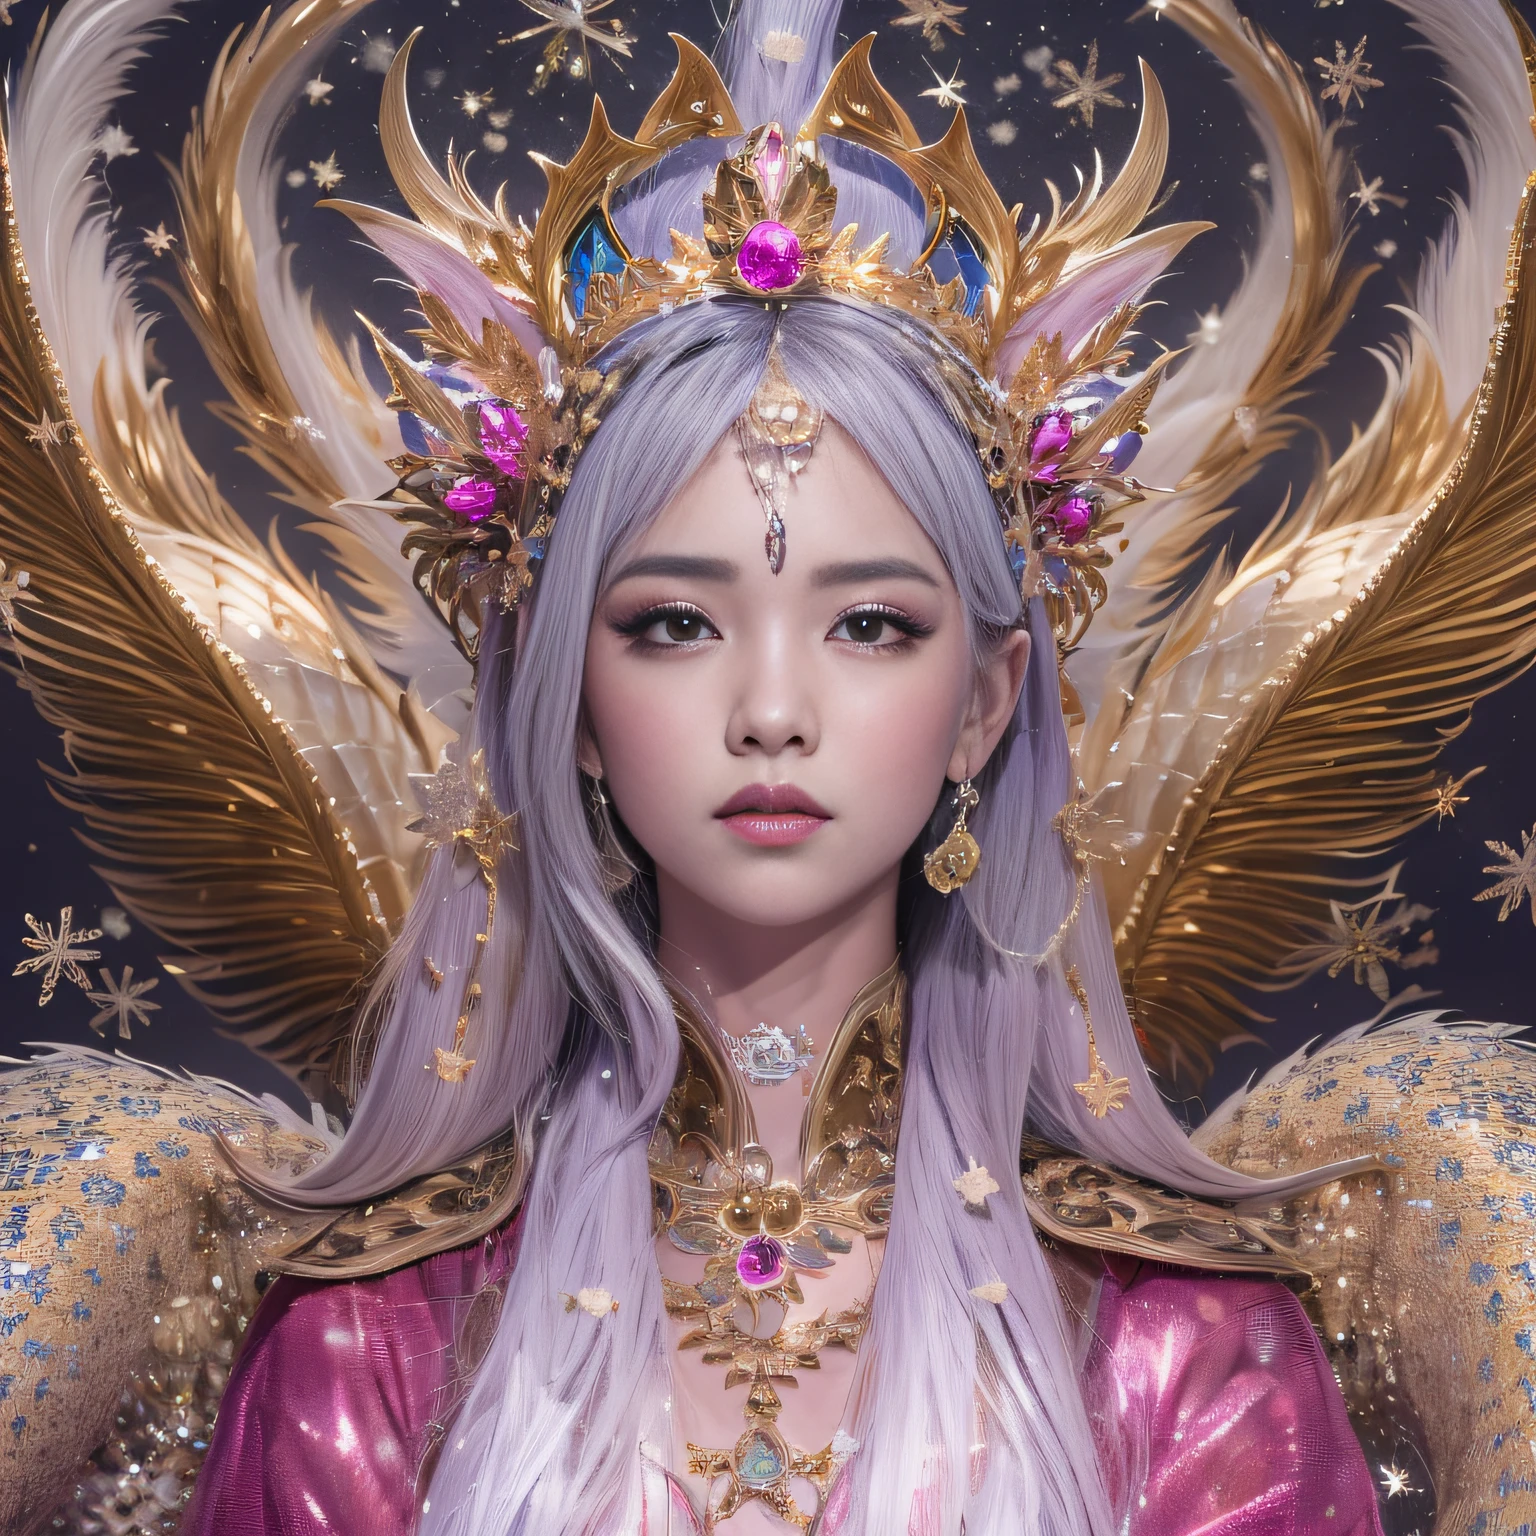 16k（tmasterpiece，k hd，hyper HD，16k）short detailed hair，Gold jewelry area in the back room，King Girl ，Silver Dragon Protector （realisticlying：1.4），Python pattern robe，Purple-pink tiara，Snowflakes fluttering，The background is pure，Hold your head high，Be proud，The nostrils look at people， A high resolution， the detail， RAW photogr， Sharp Re， Nikon D850 Film Stock Photo by Jefferies Lee 4 Kodak Portra 400 Camera F1.6 shots, Rich colors, ultra-realistic vivid textures, Dramatic lighting, Unreal Engine Art Station Trend, cinestir 800，Hold your head high，Be proud，The nostrils look at people